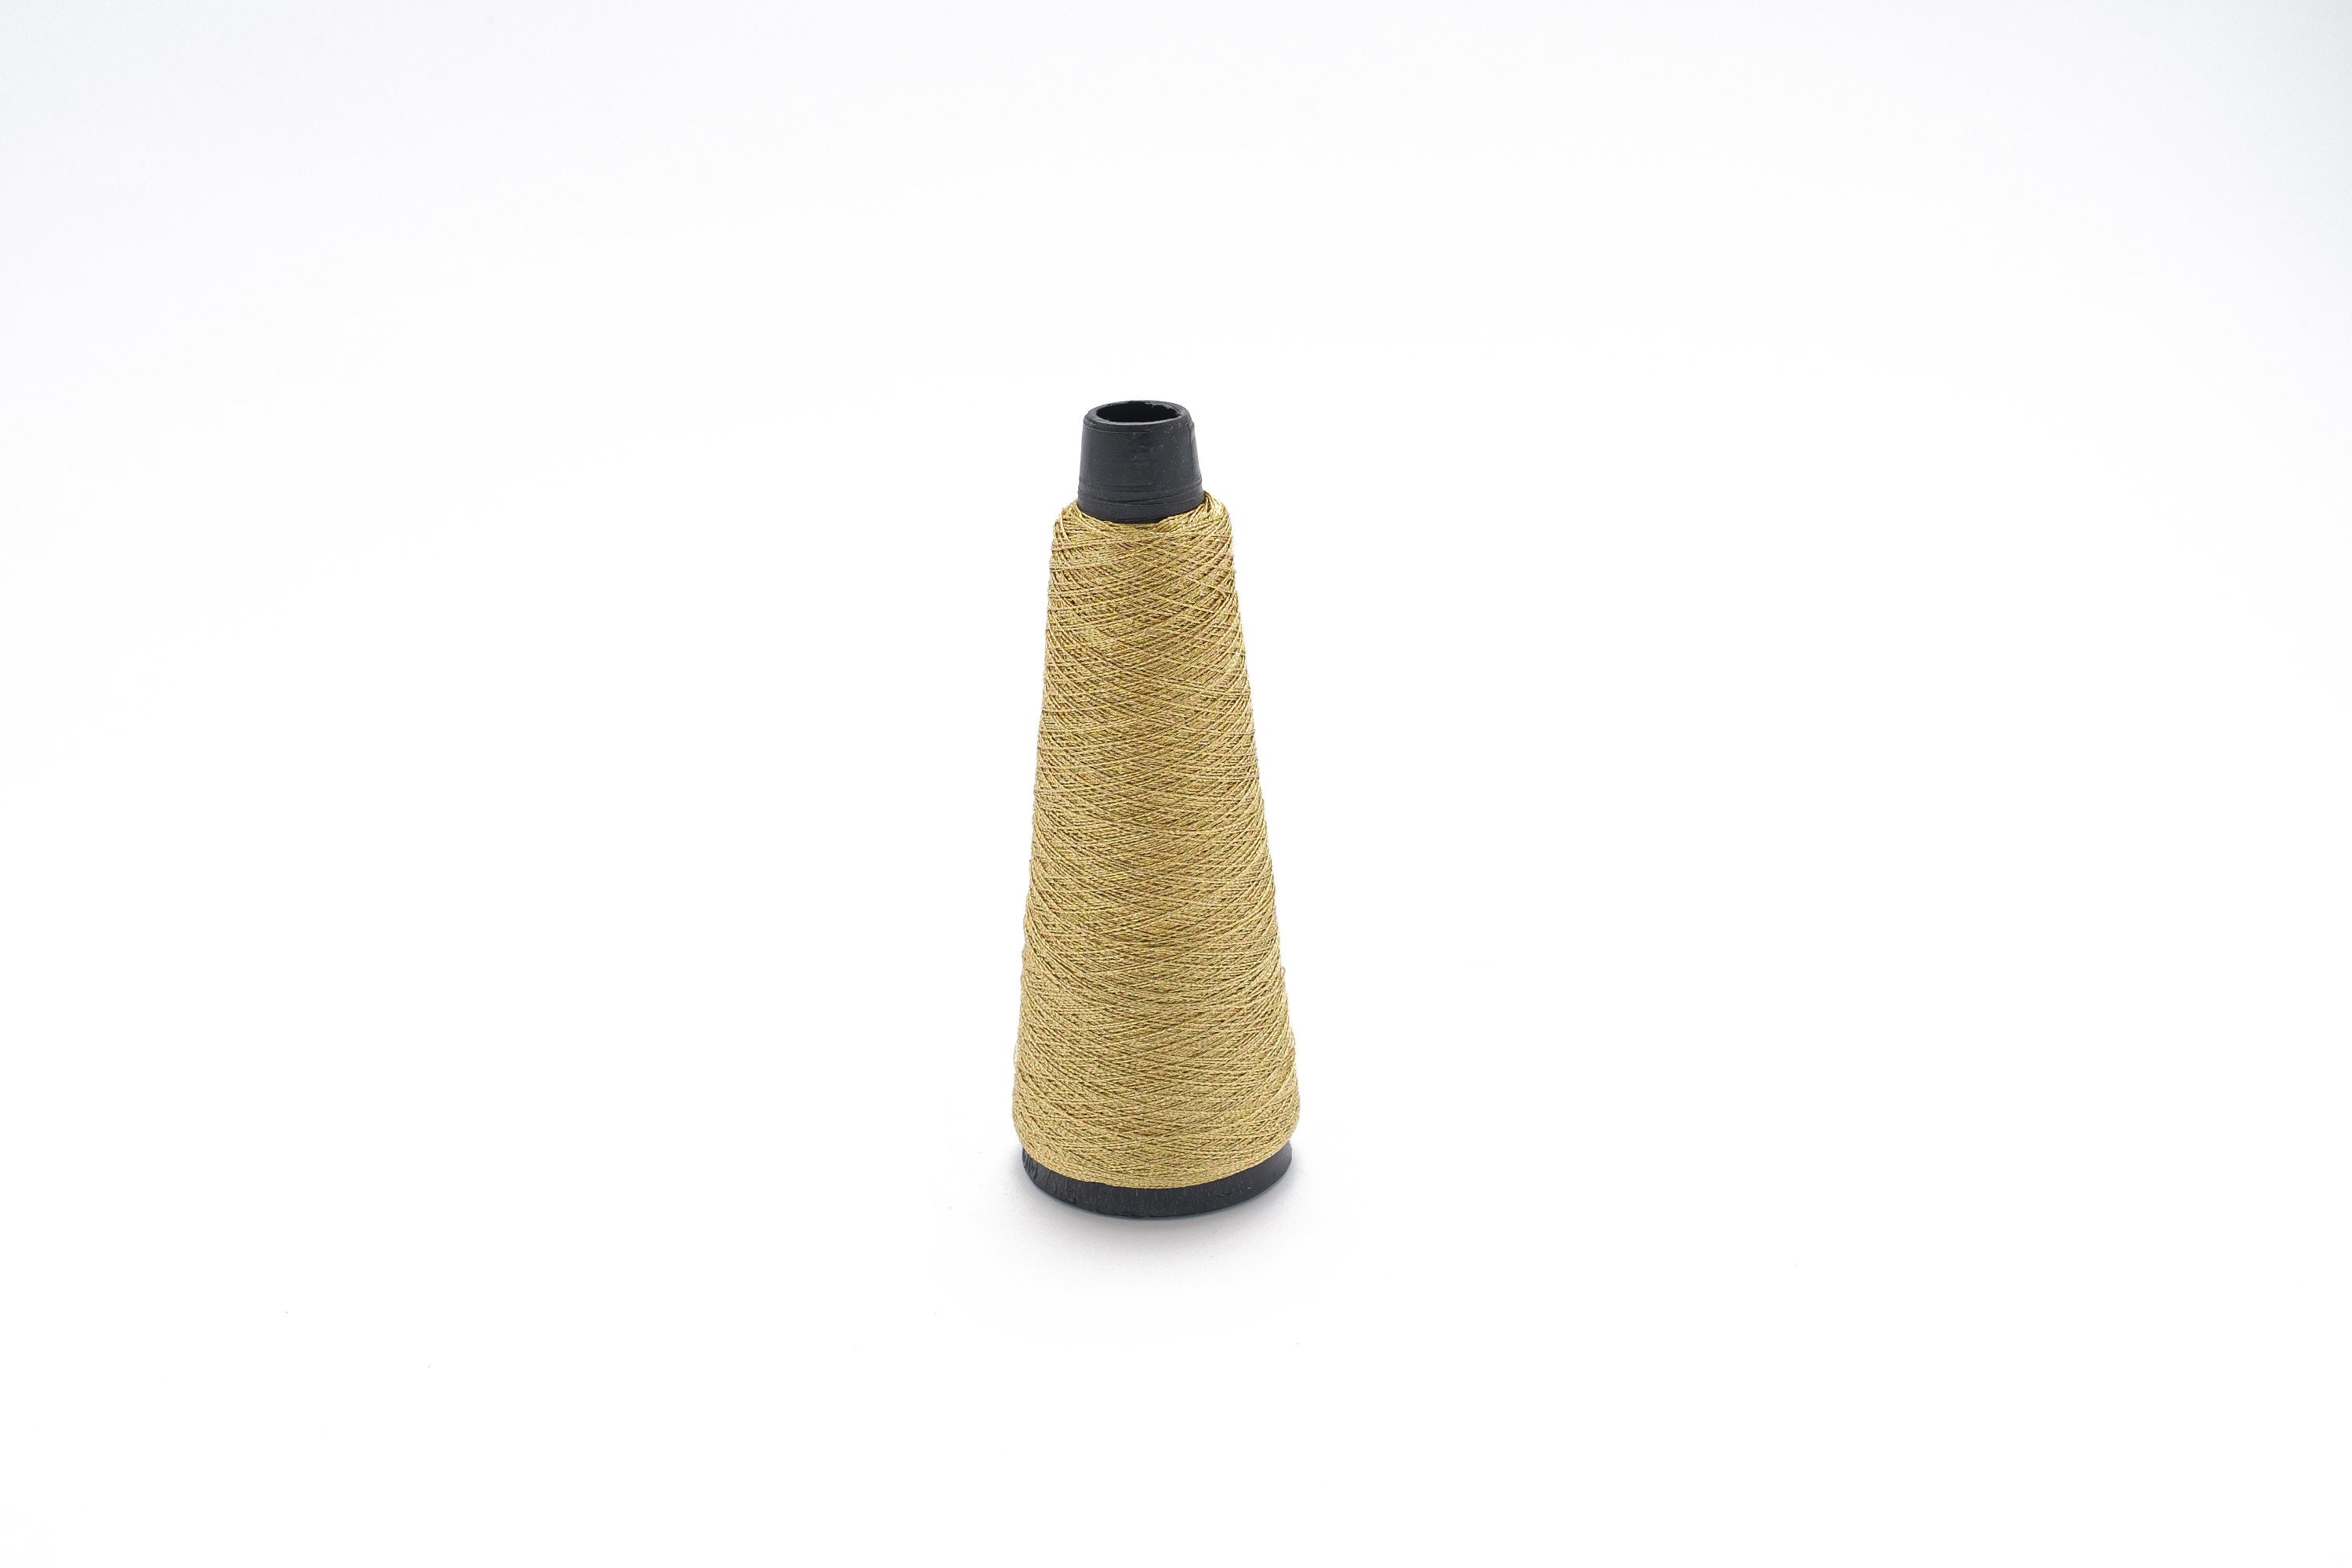 High Quality 0.5MM Gold Cord Gold String Japanese Elastic Cord 